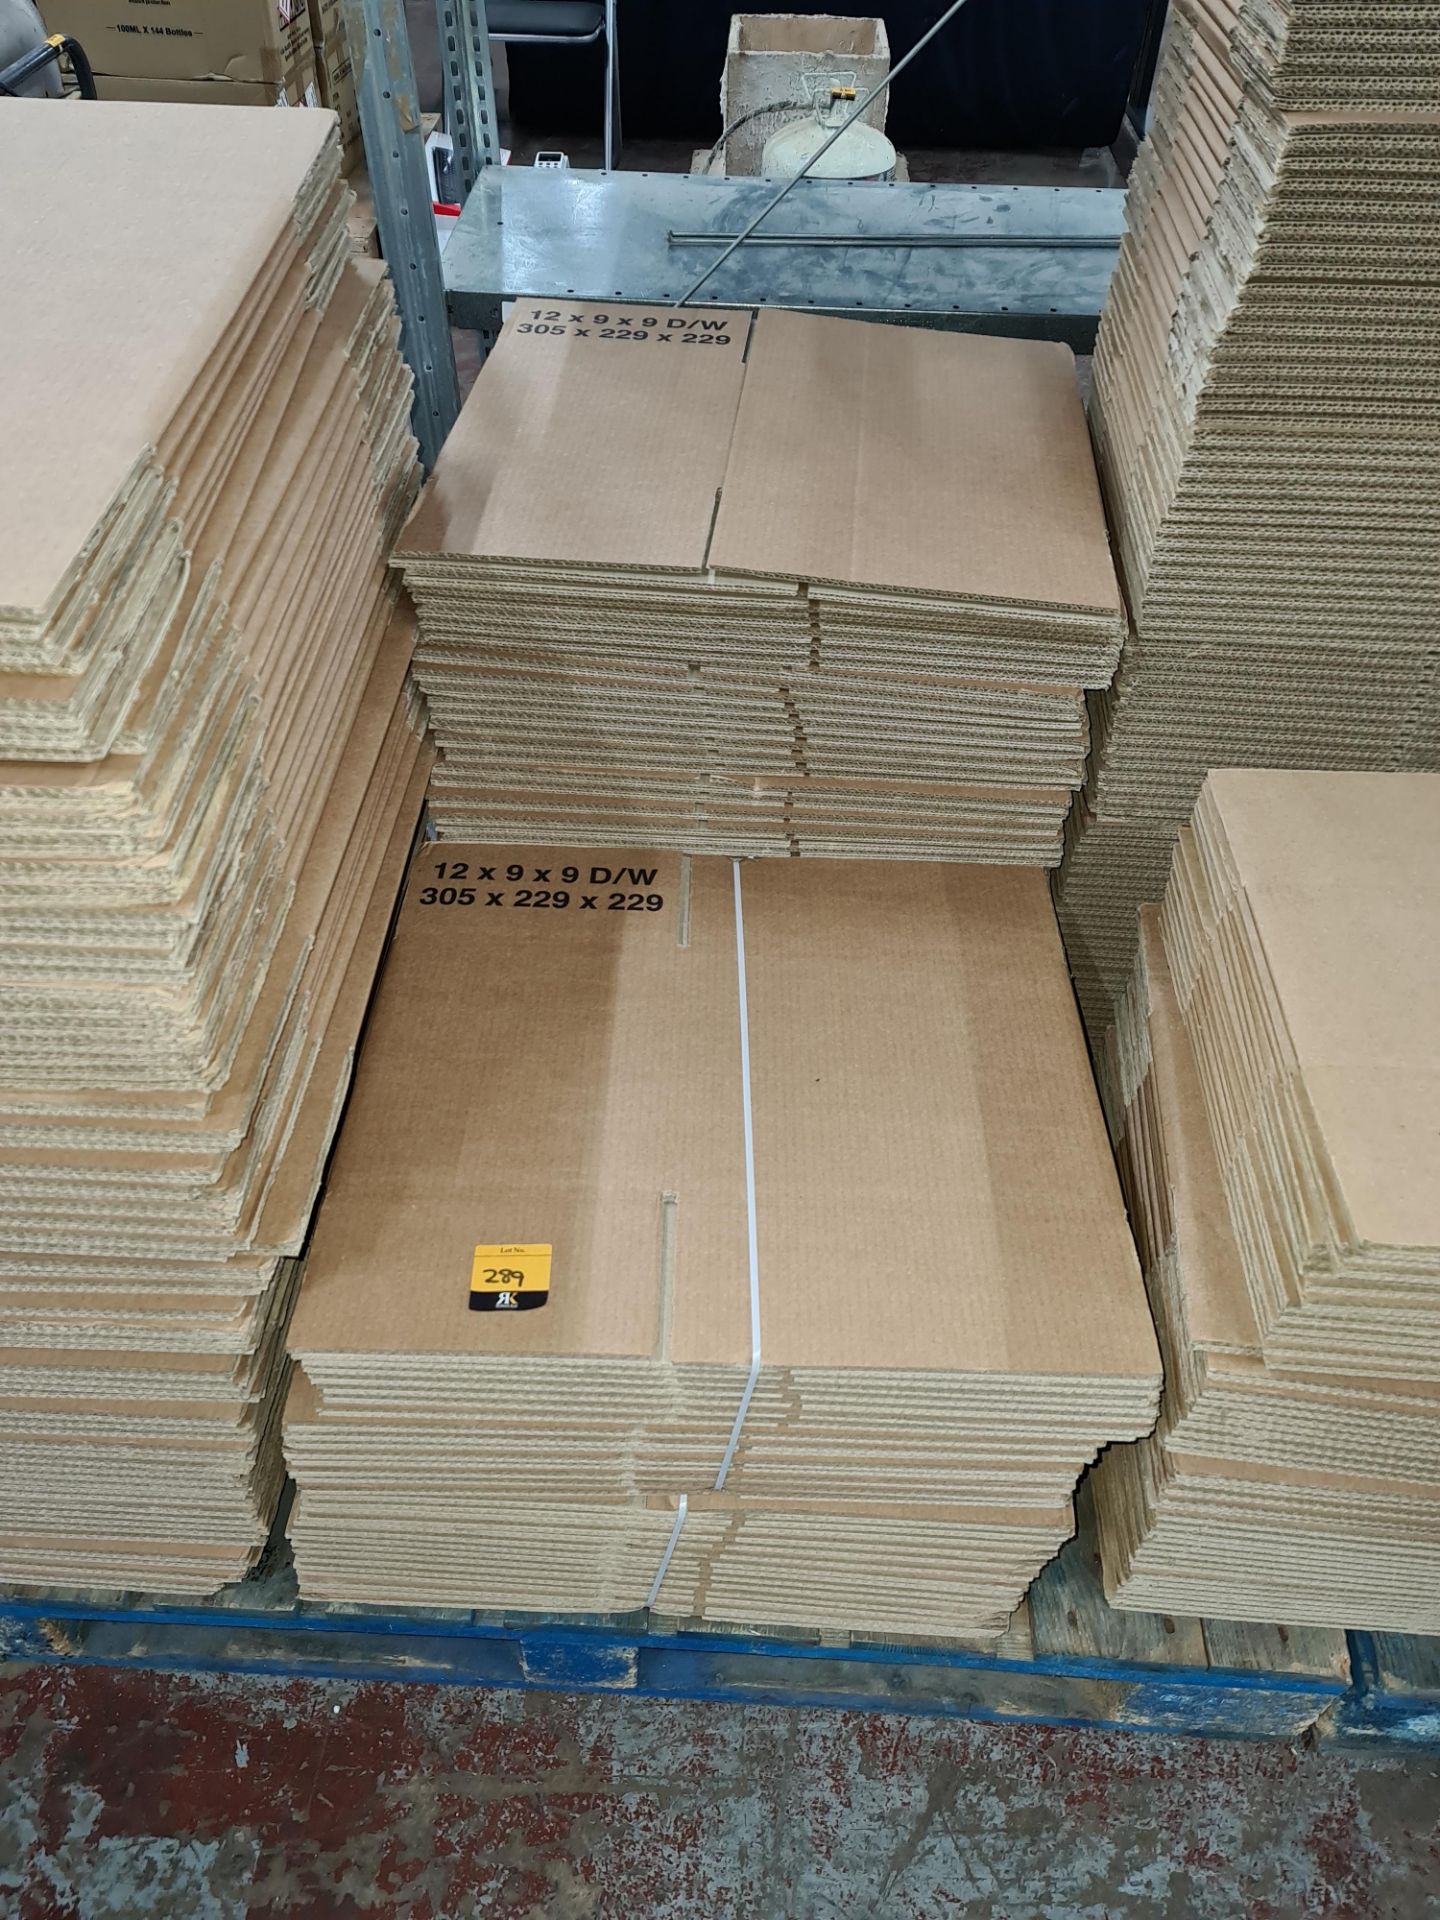 4 bundles of flatpack cardboard boxes each measuring 305 x 229 x 229. NB this lot also includes a